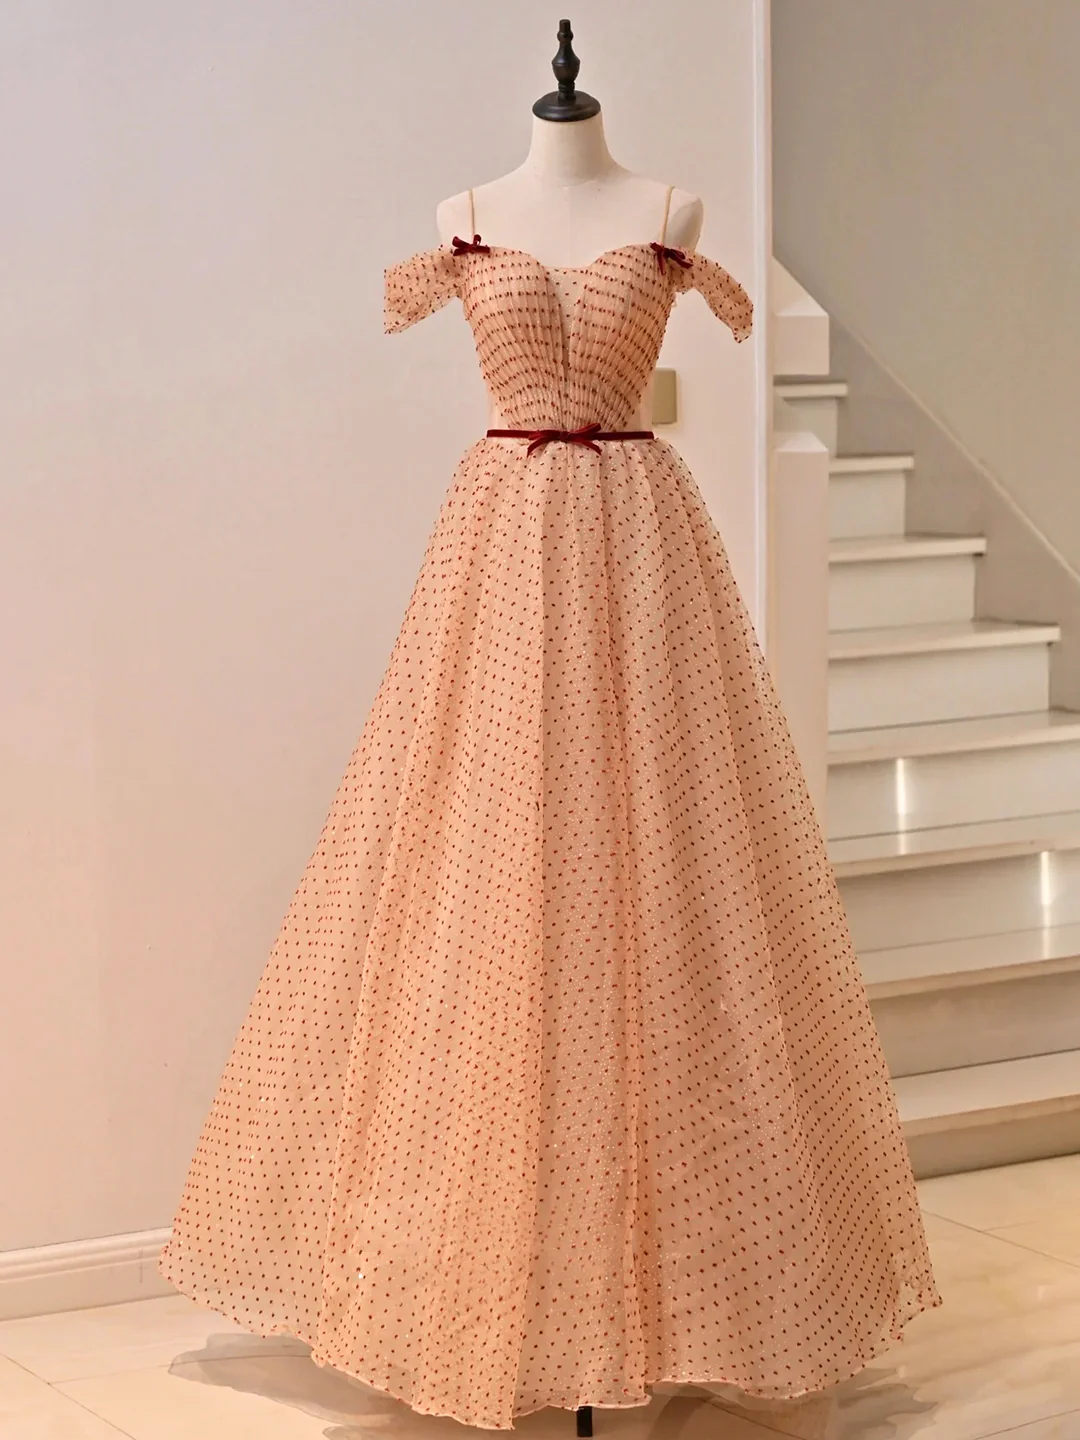 Cute Tulle Floor Length Prom Dress, Off The Shoulder Evening Party Dress